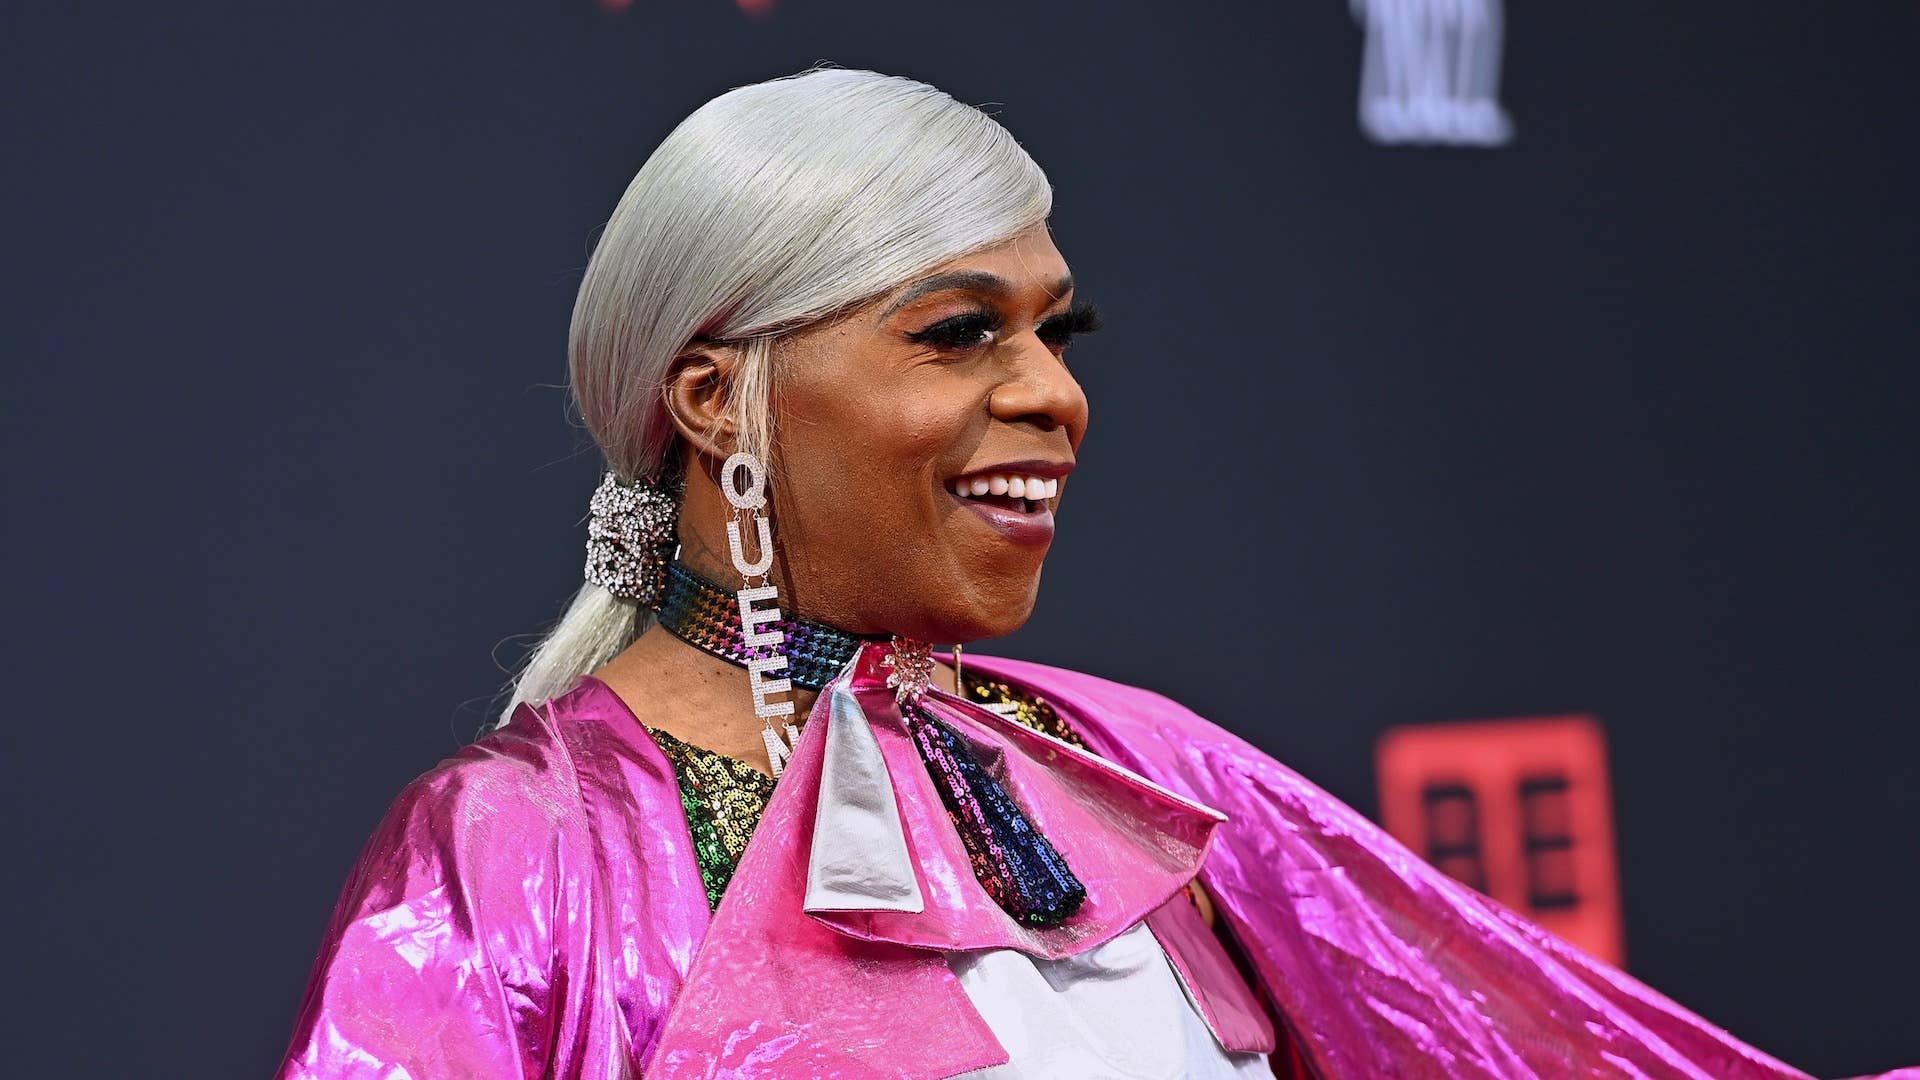 Big Freedia attends the 2022 BET Awards at Microsoft Theater